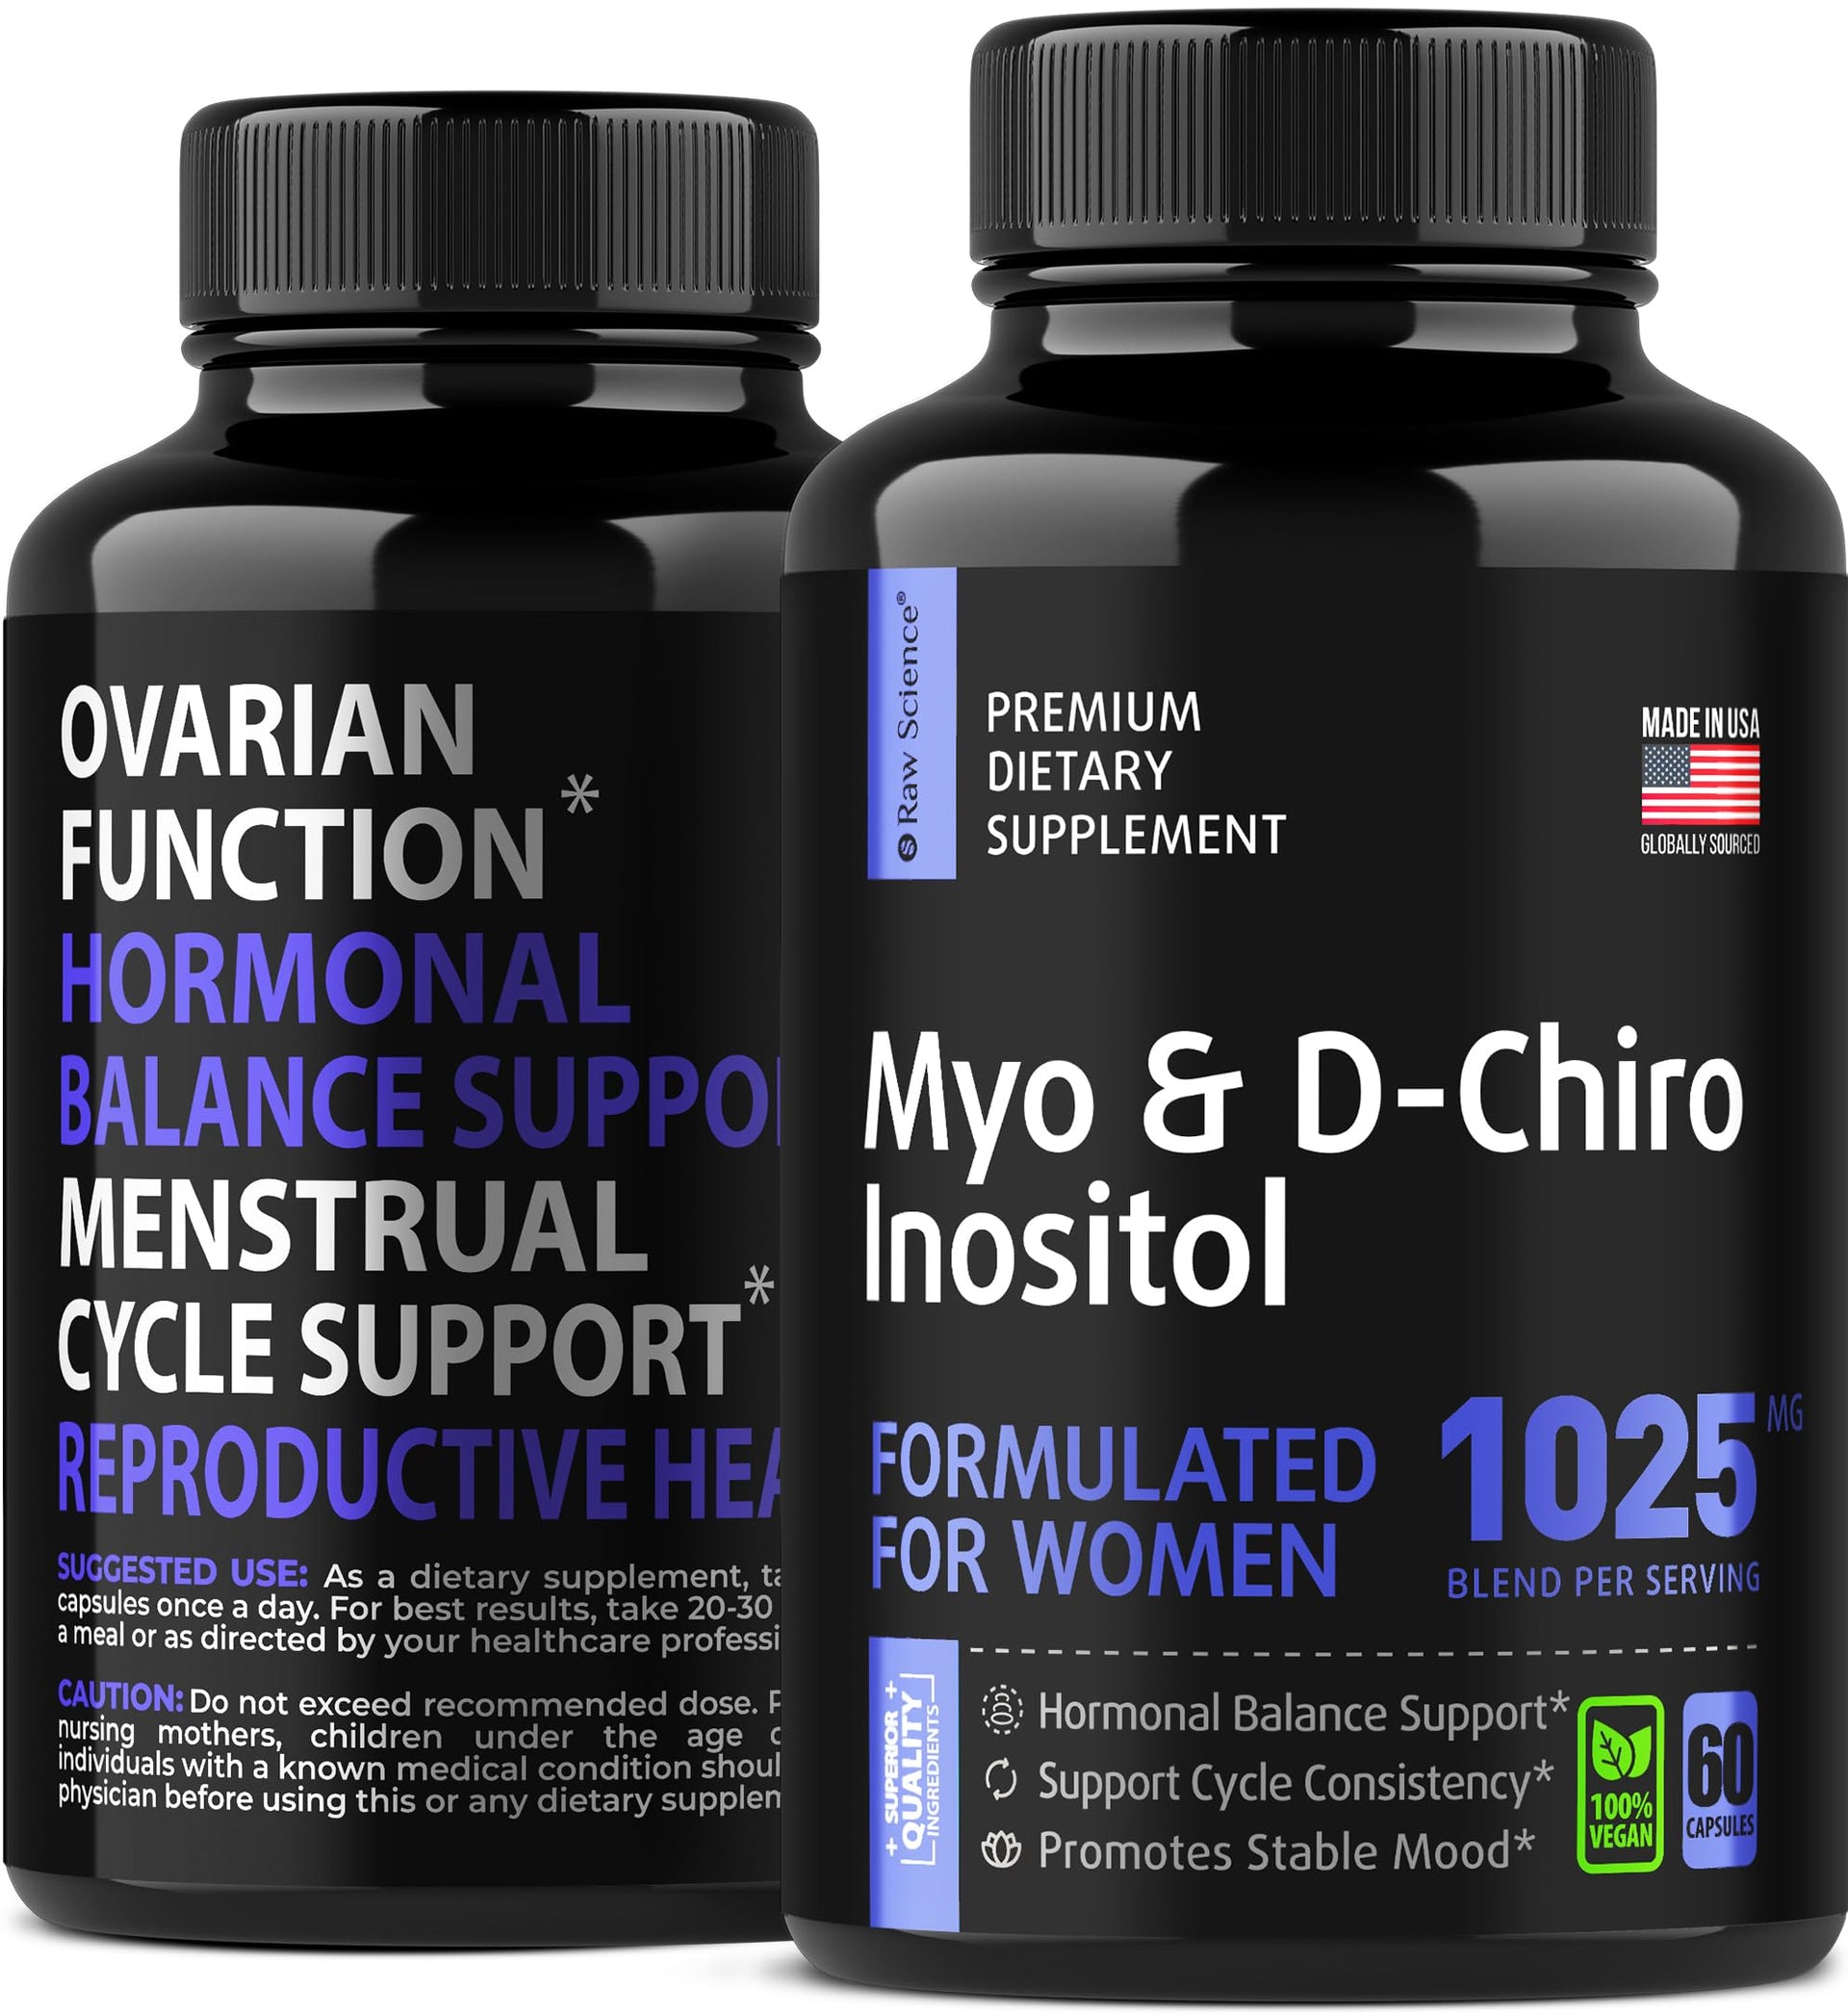 Myo-Inositol & D-Chiro Inositol Blend Capsule | 30-Day Supply | Most  Beneficial 40:1 Ratio | Hormonal Balance & Healthy Ovarian Function Support  for